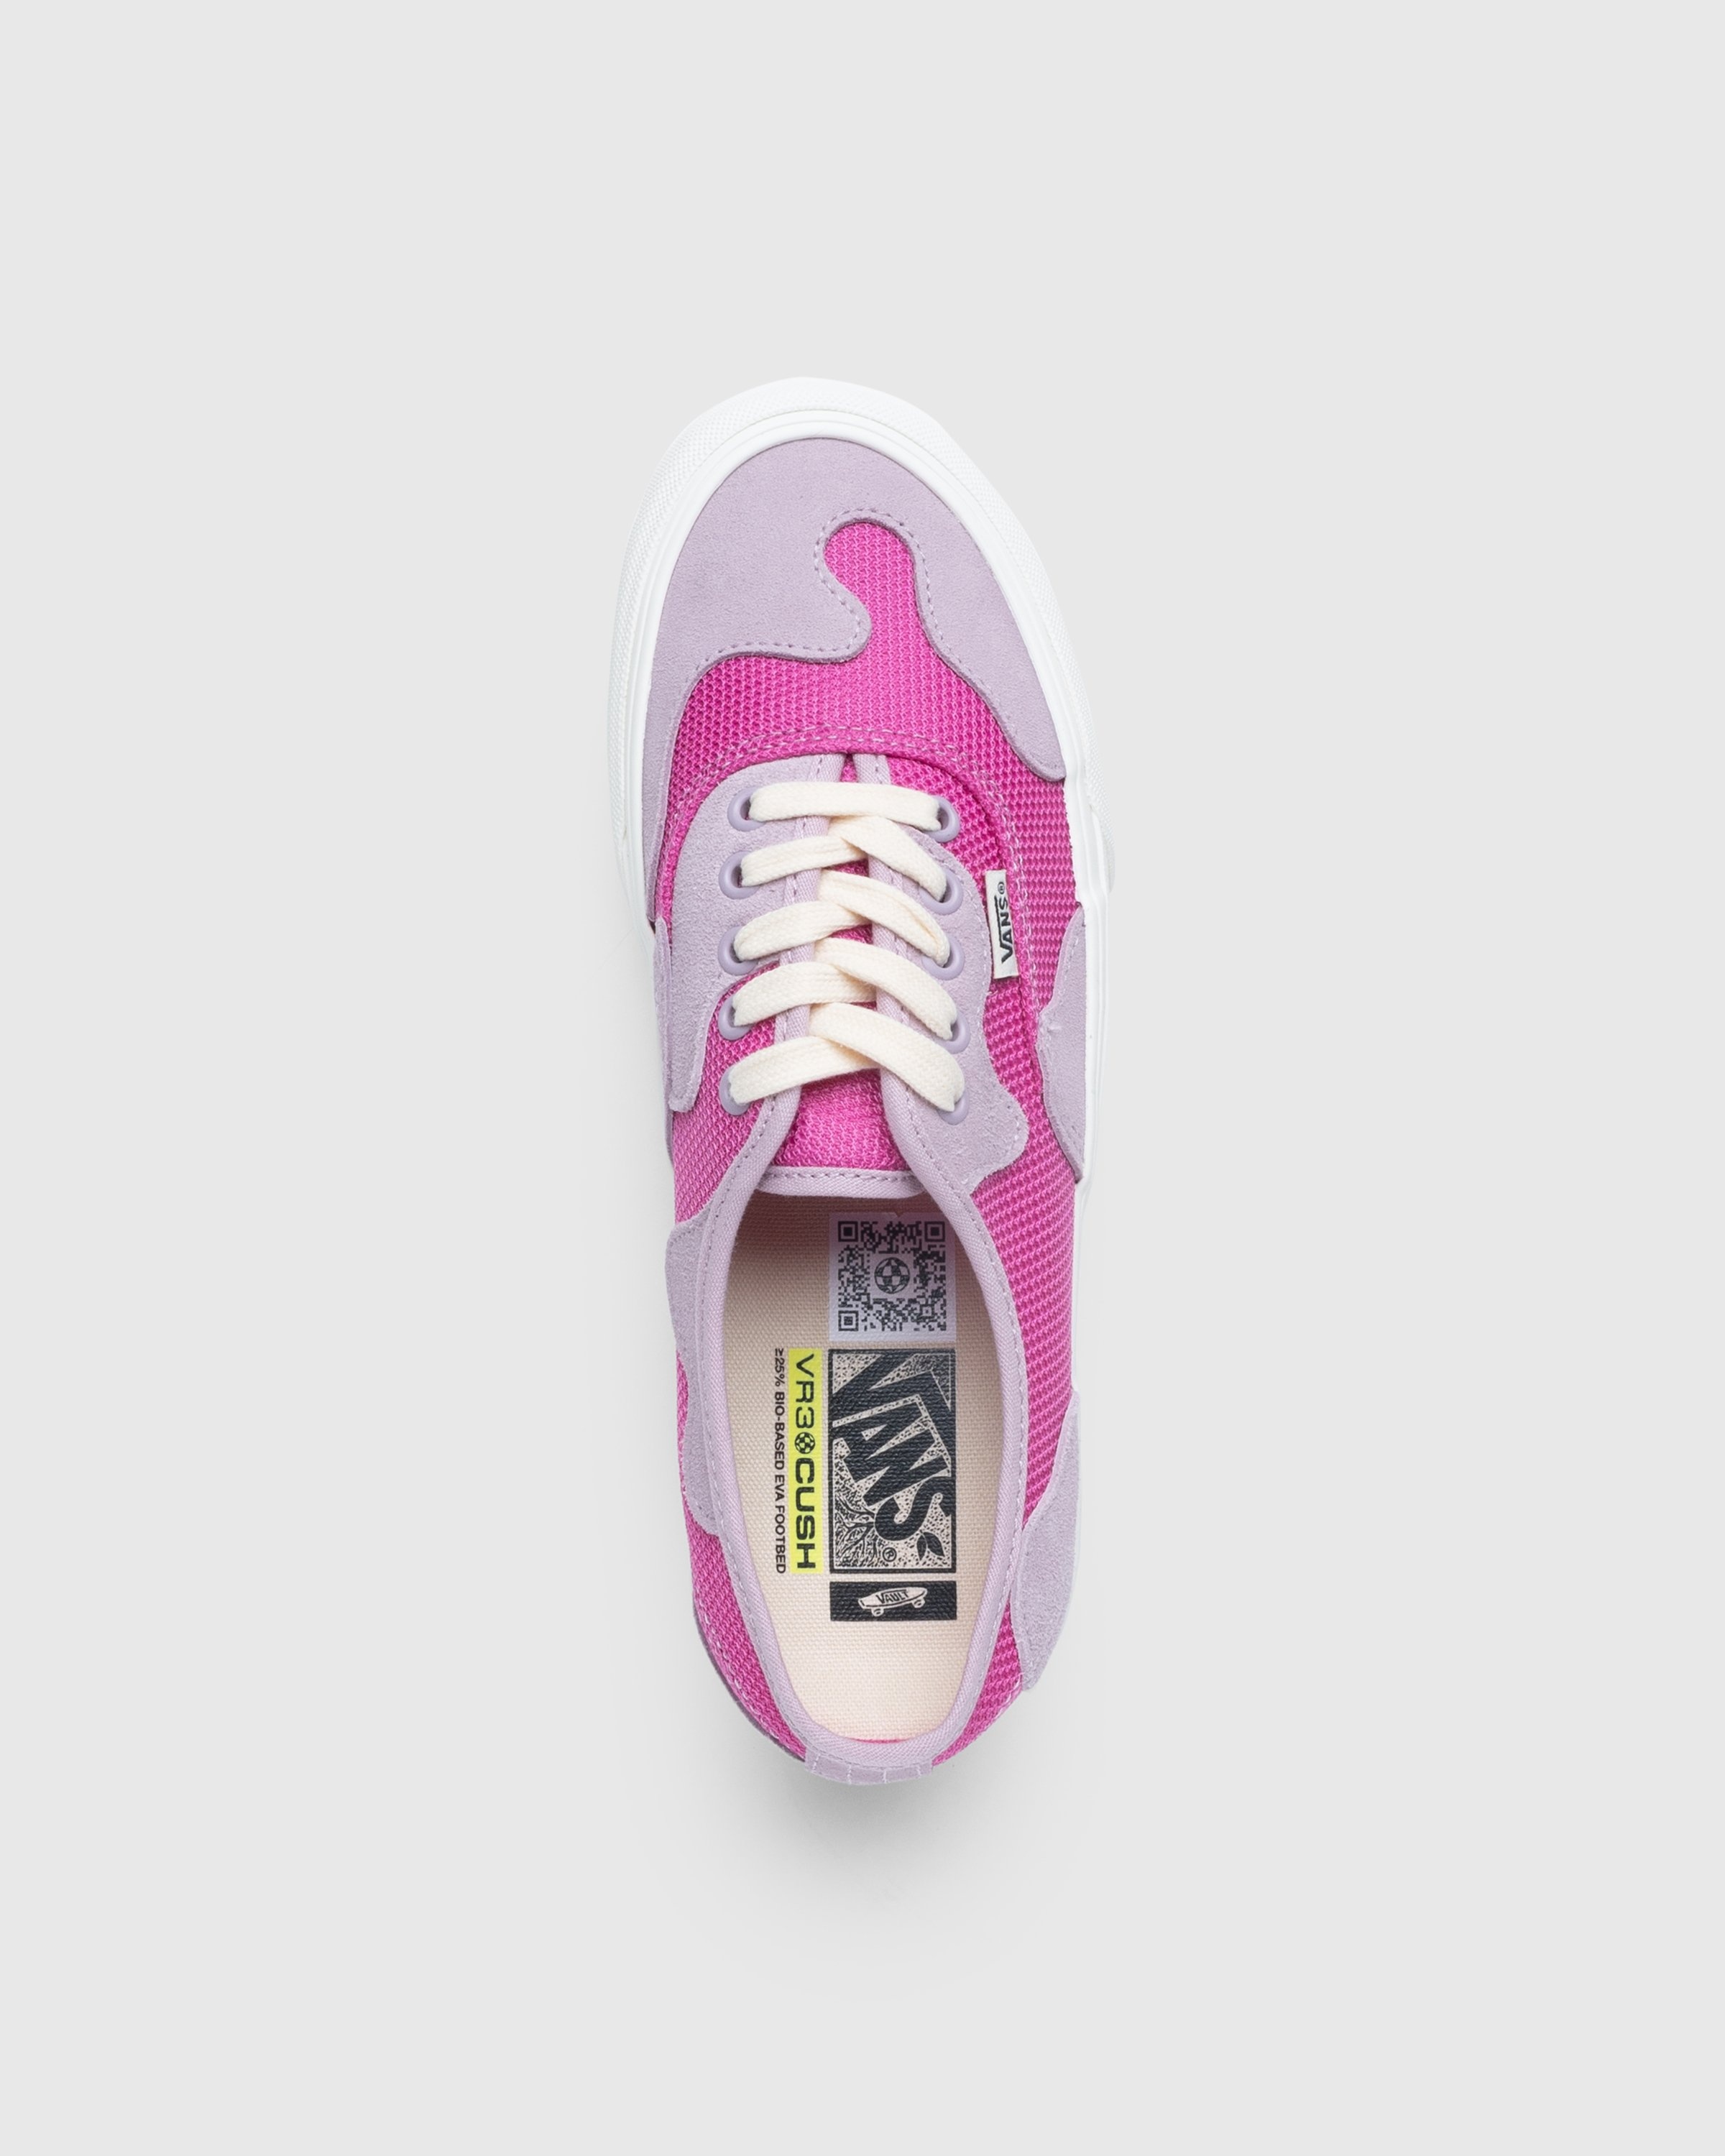 Vans – UA Authentic VR3 PW LX Pink - Sneakers - Pink - Image 5